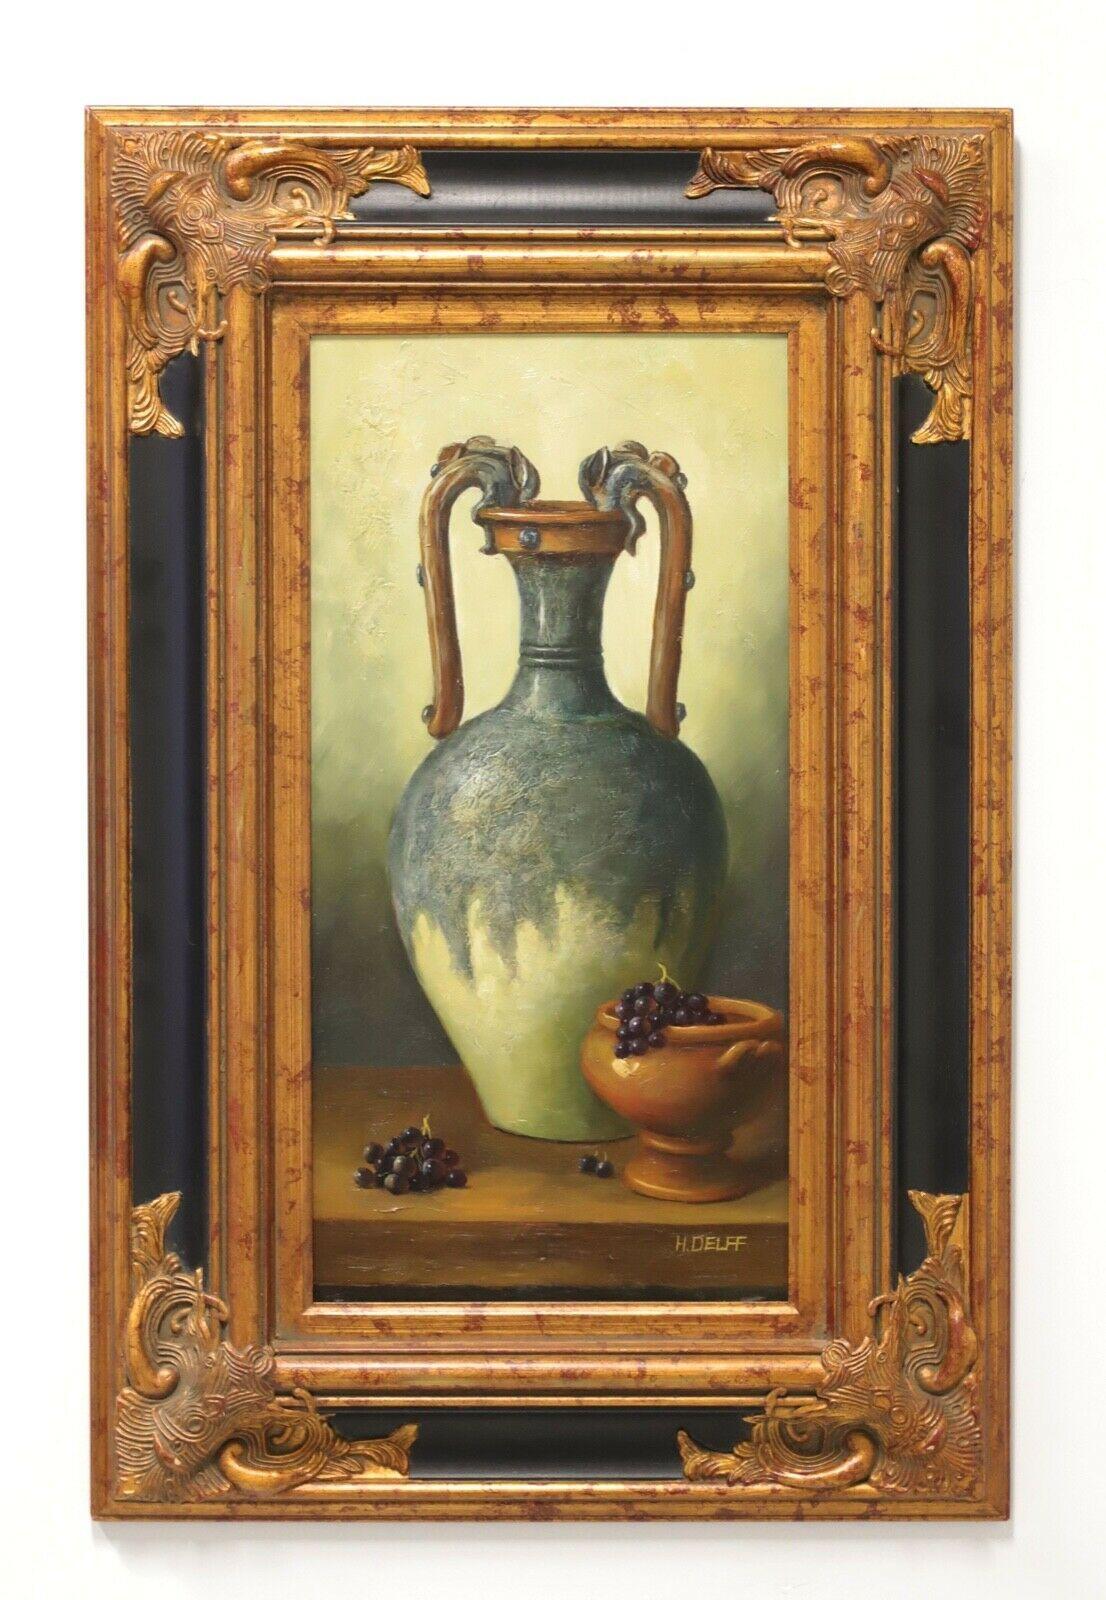 20th Century Original Oil on Canvas Painting - Urn with Grapes - Signed H Delff For Sale 3